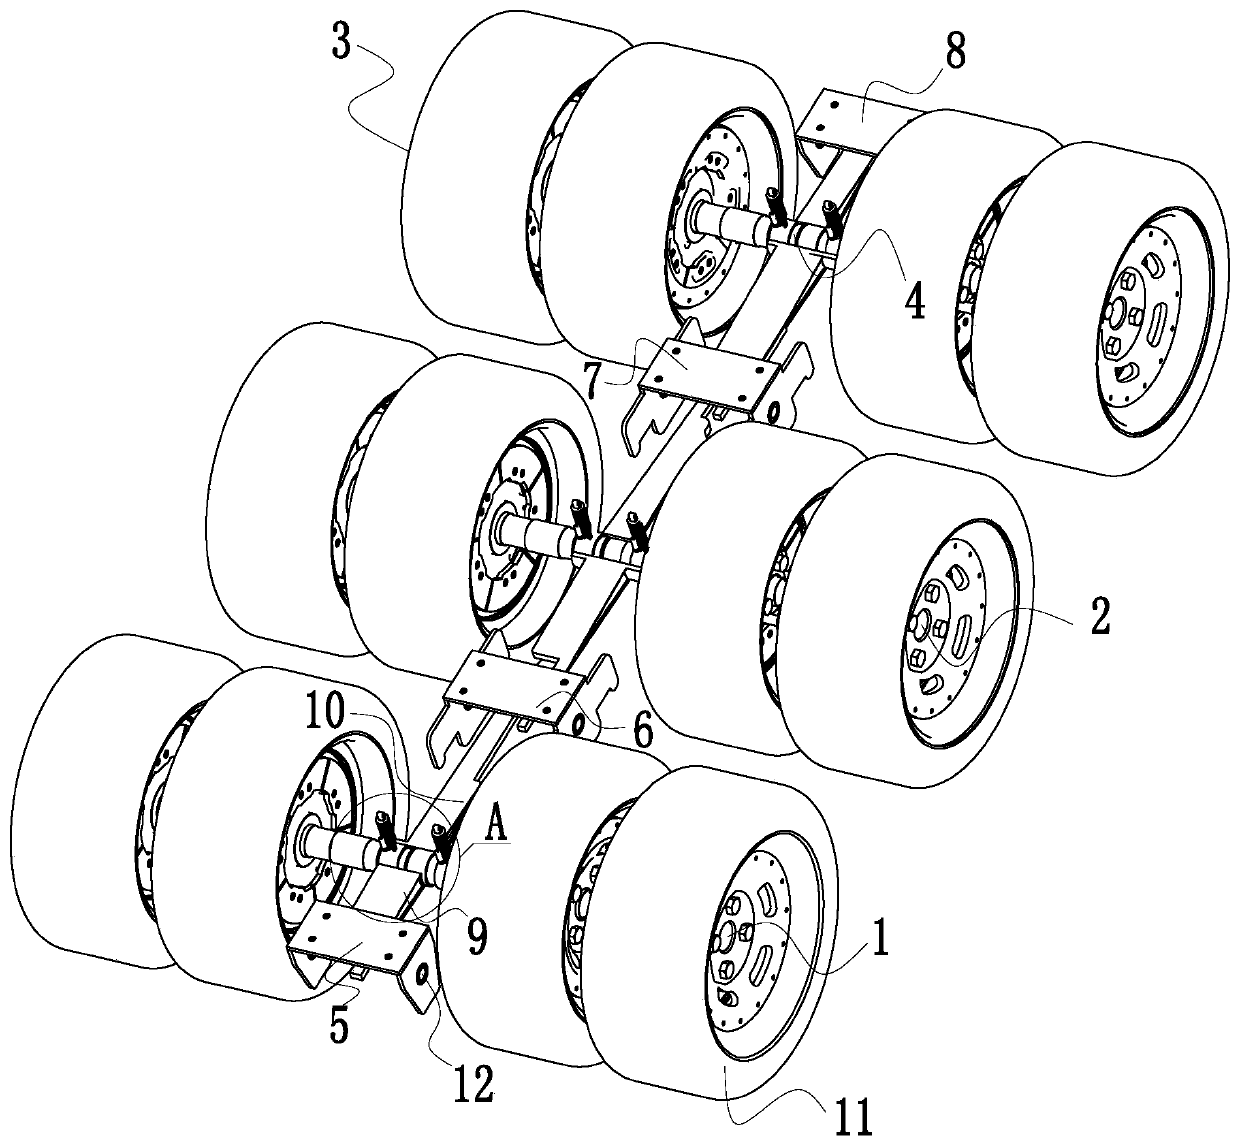 Multi-axis suspension axle assembly